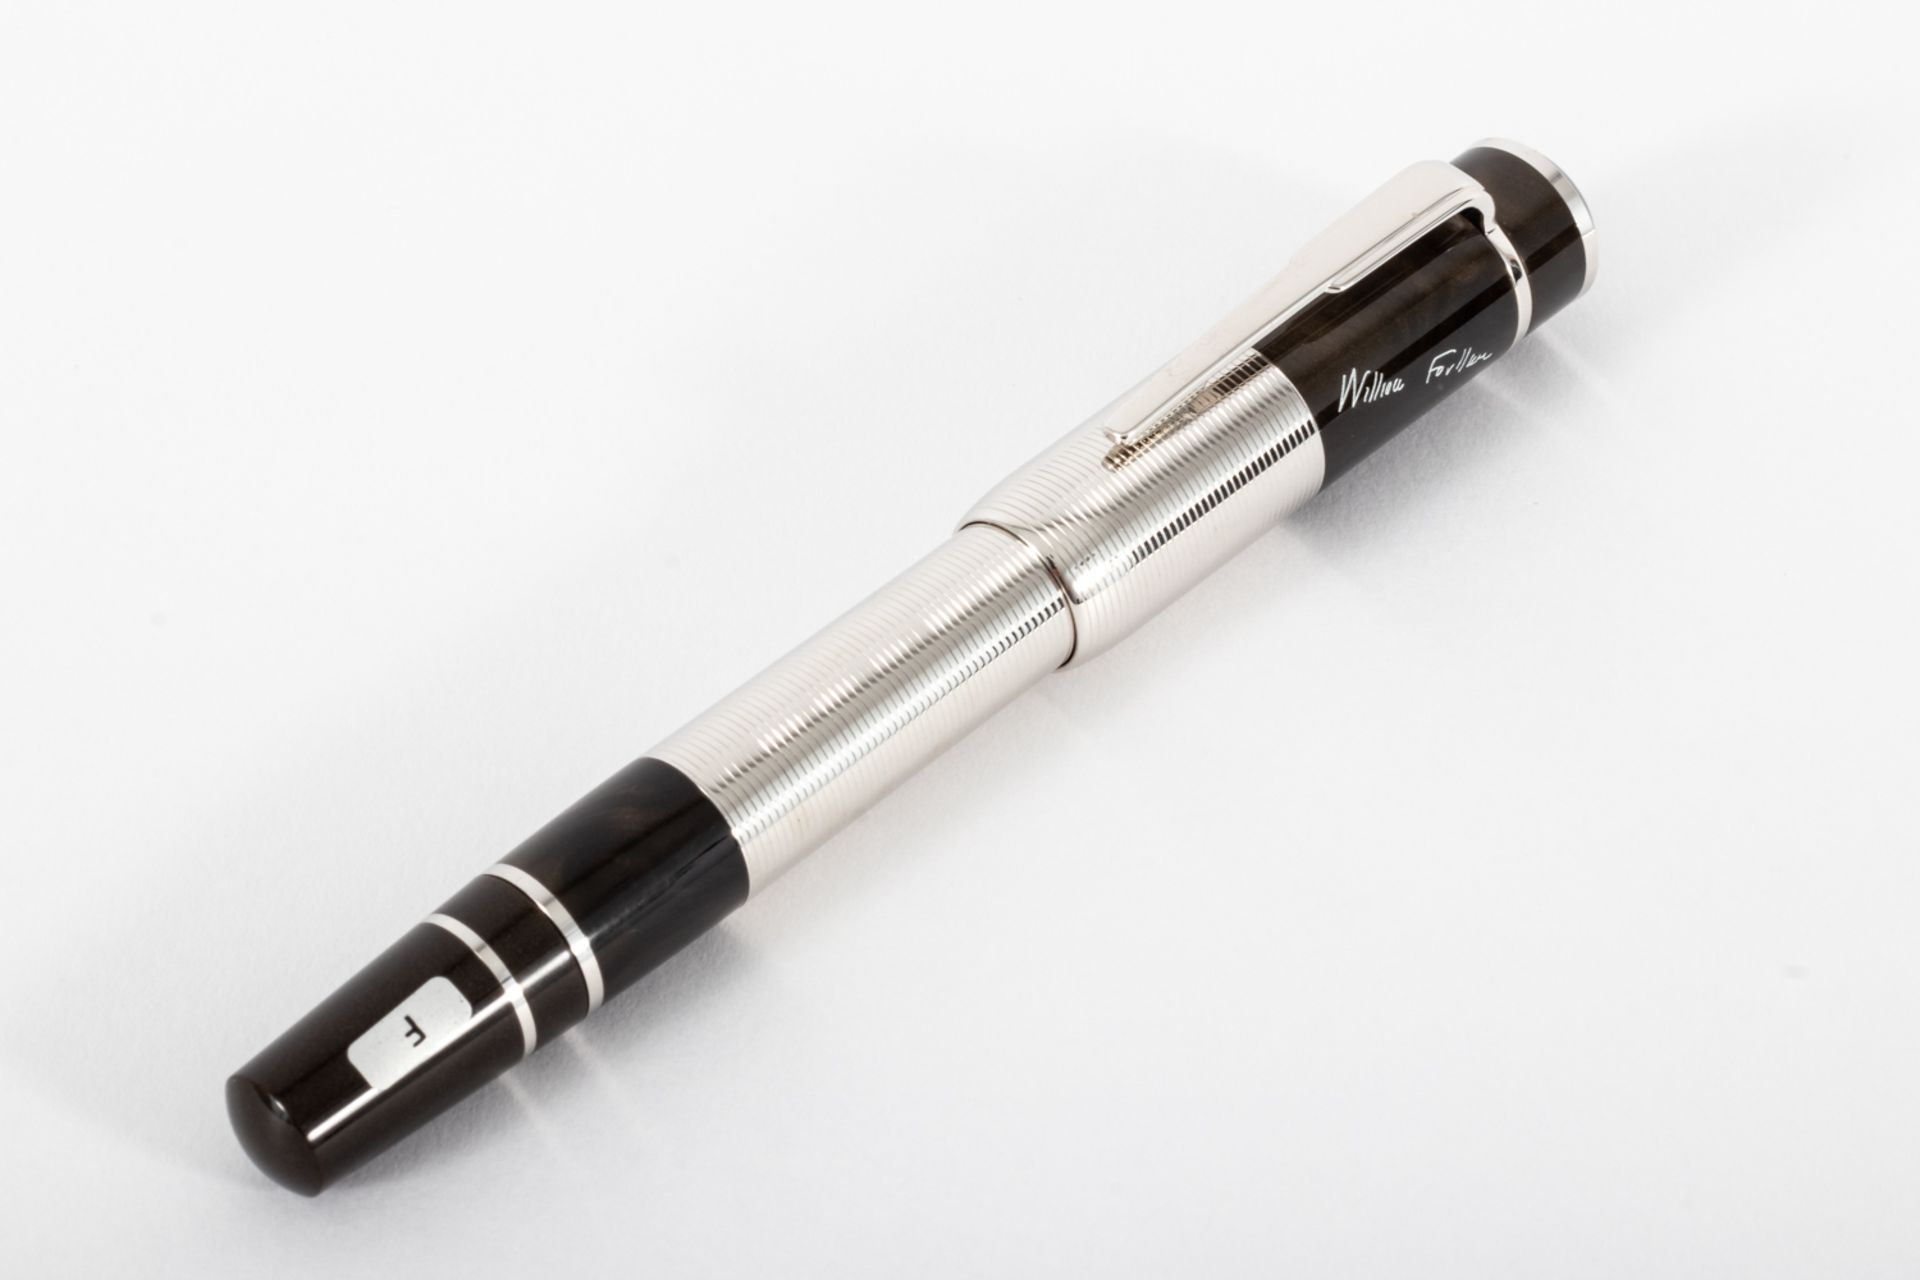 Montblanc fountain pen "Writers" collection model "William Faulkner", 2007. 